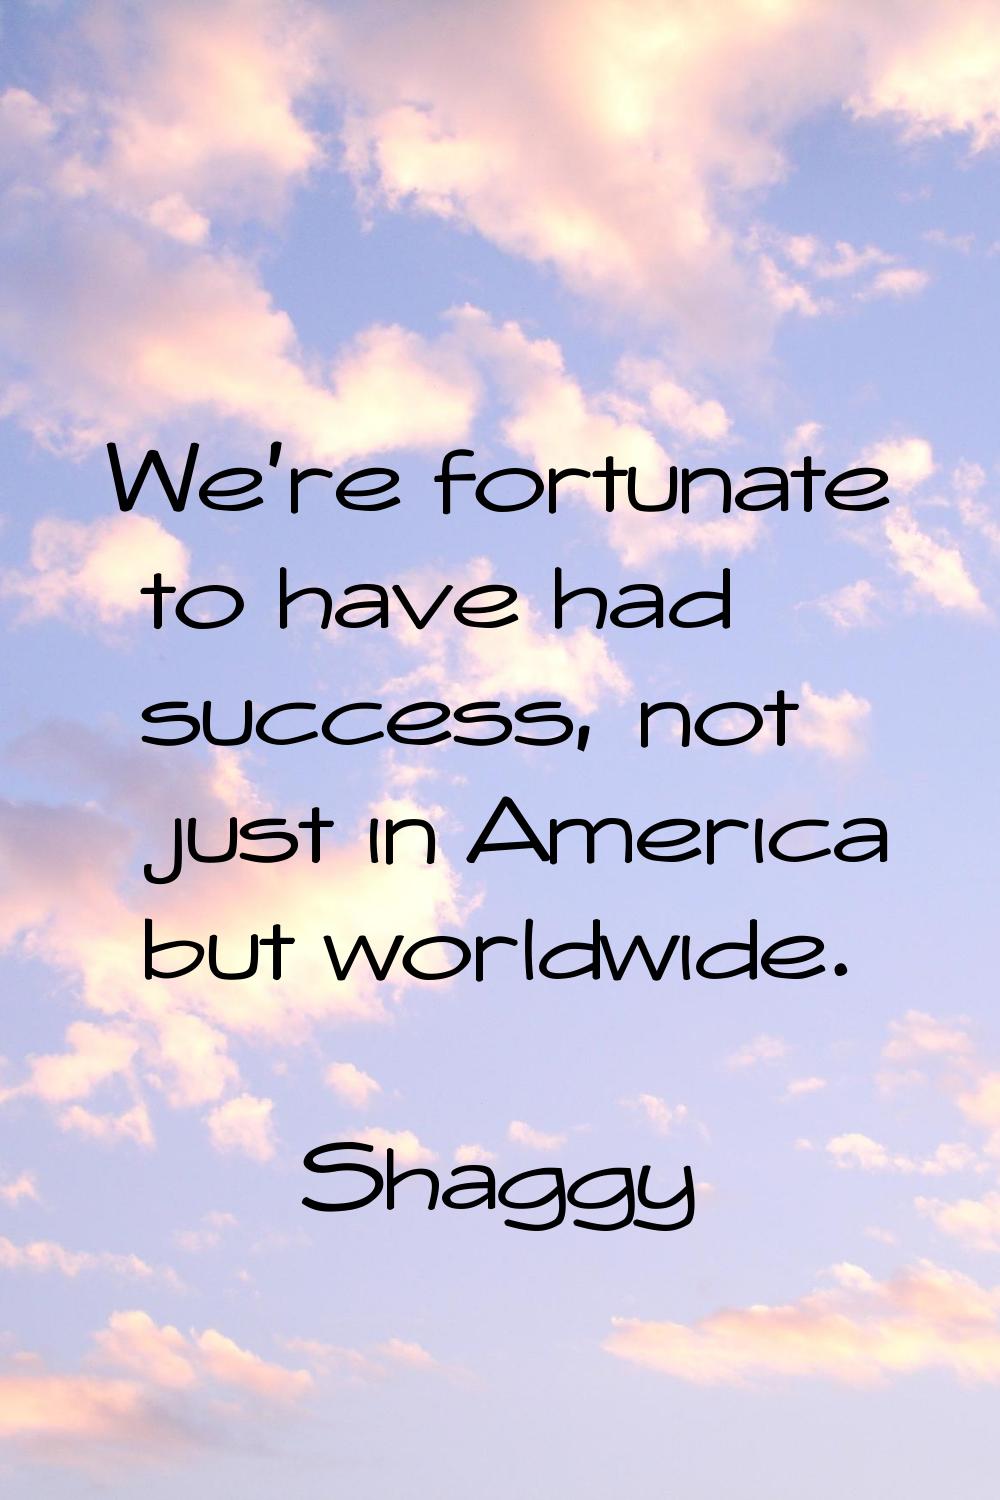 We're fortunate to have had success, not just in America but worldwide.